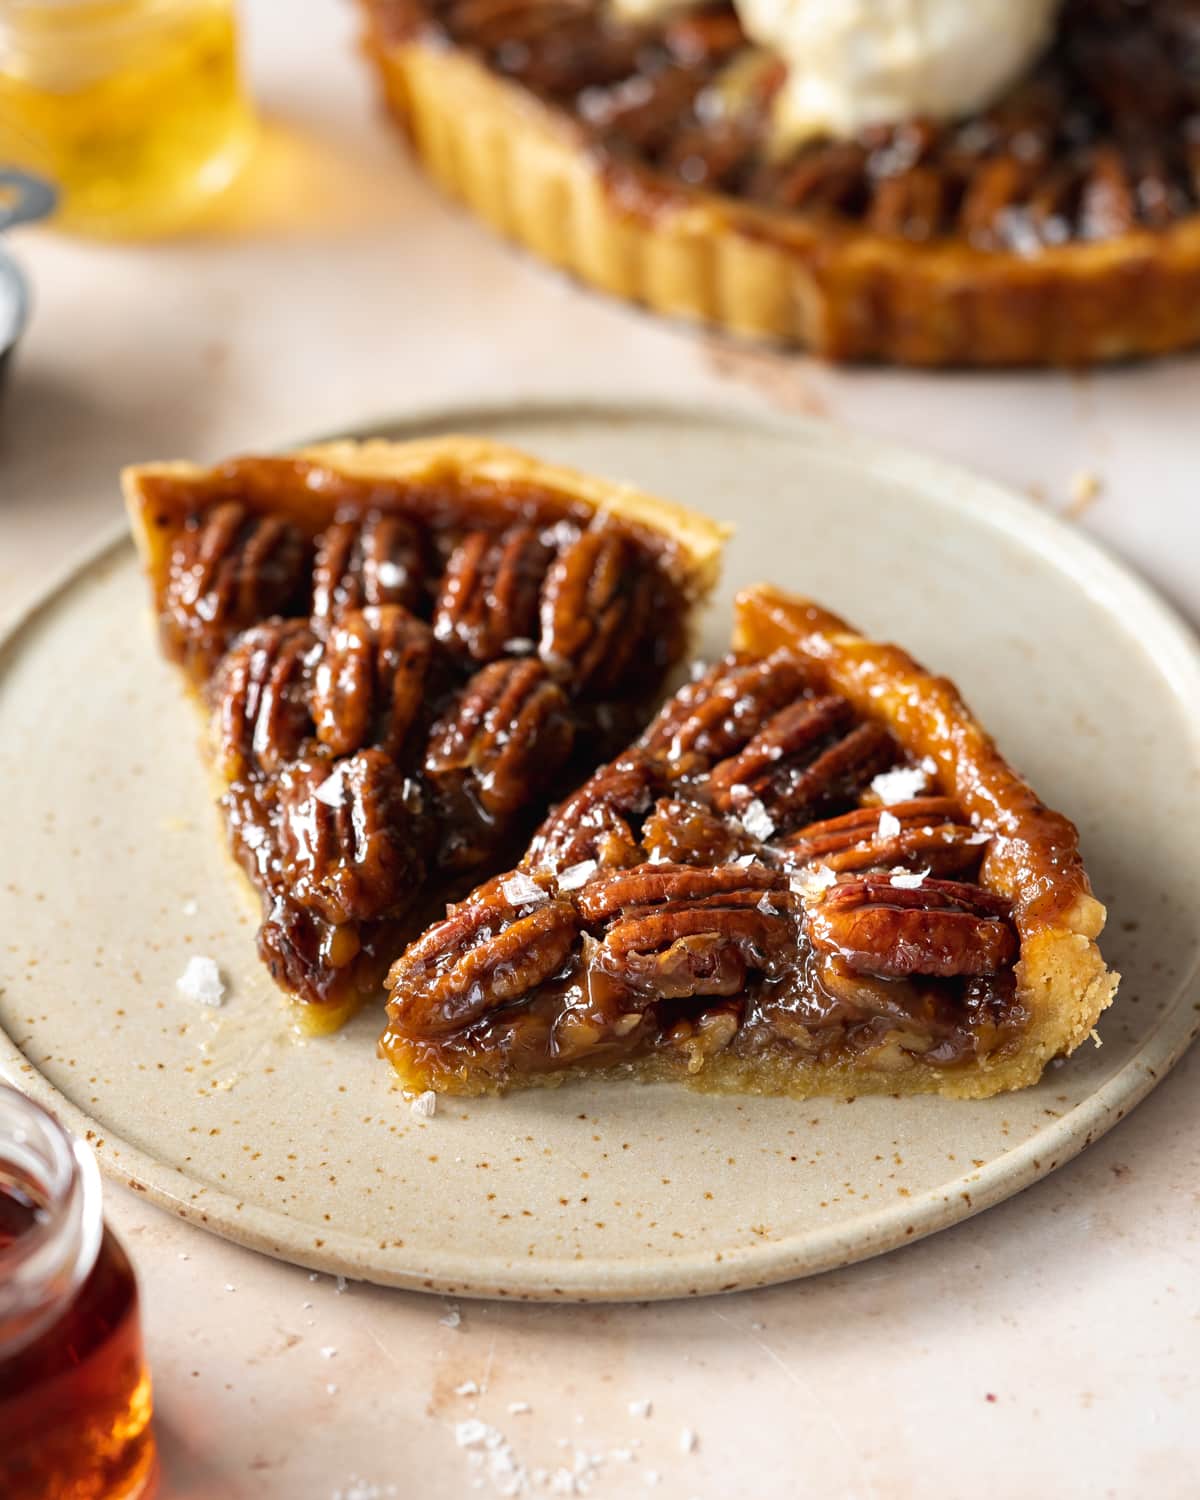 two slices of pecan pie on a ceramic plate.